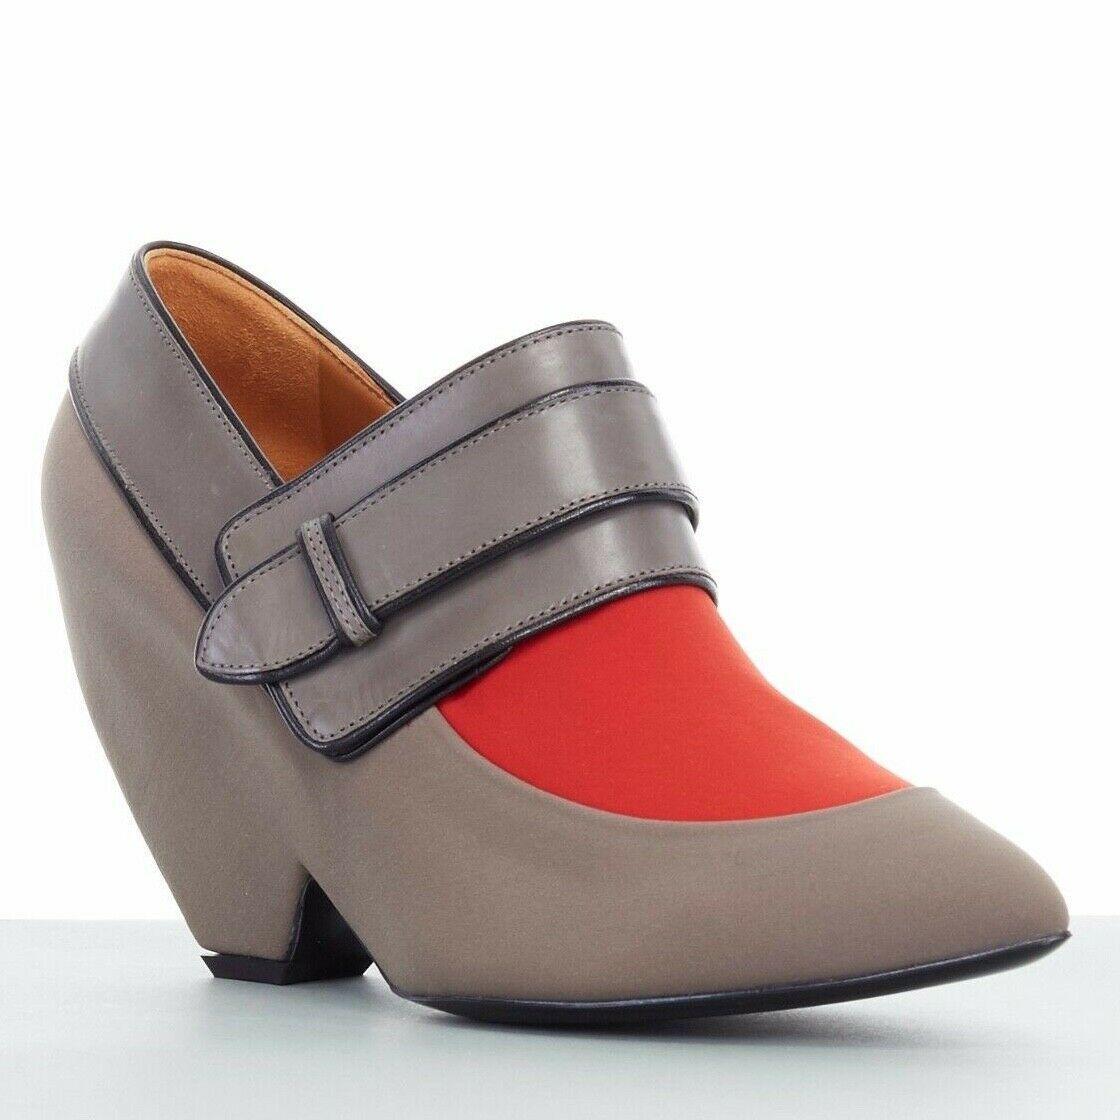 new BALENCIAGA GHESQUIERE AW12 grey orange pointy wedge heel shoes EU38 US8 UK5
BALENCIAGA by NICHOLAS GHESQUIERE
FROM THE FALL WINTER 2012 COLLECTION
Taupe grey and burnt orange scuba . 
Pointed toe . 
Rounded wedge . 
Grey leather strap across